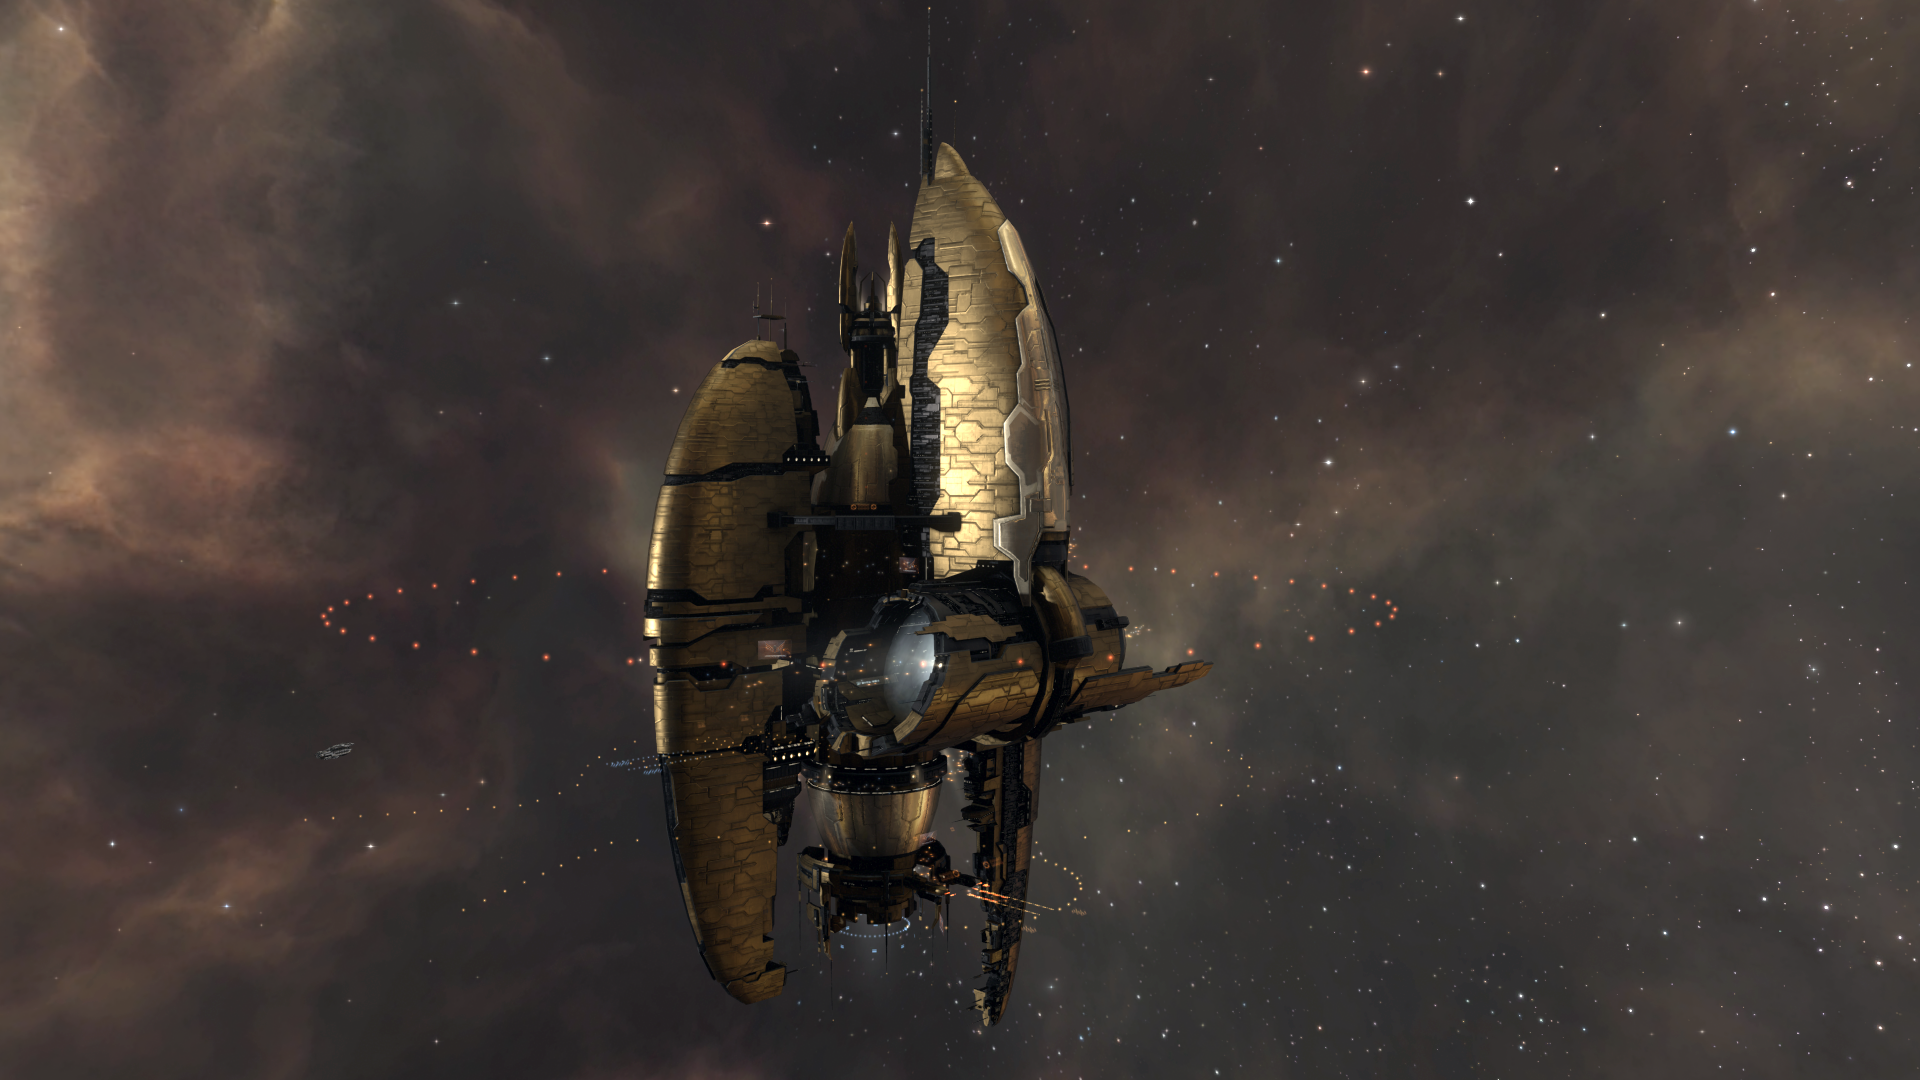 Eve's Online 2009 Space Station